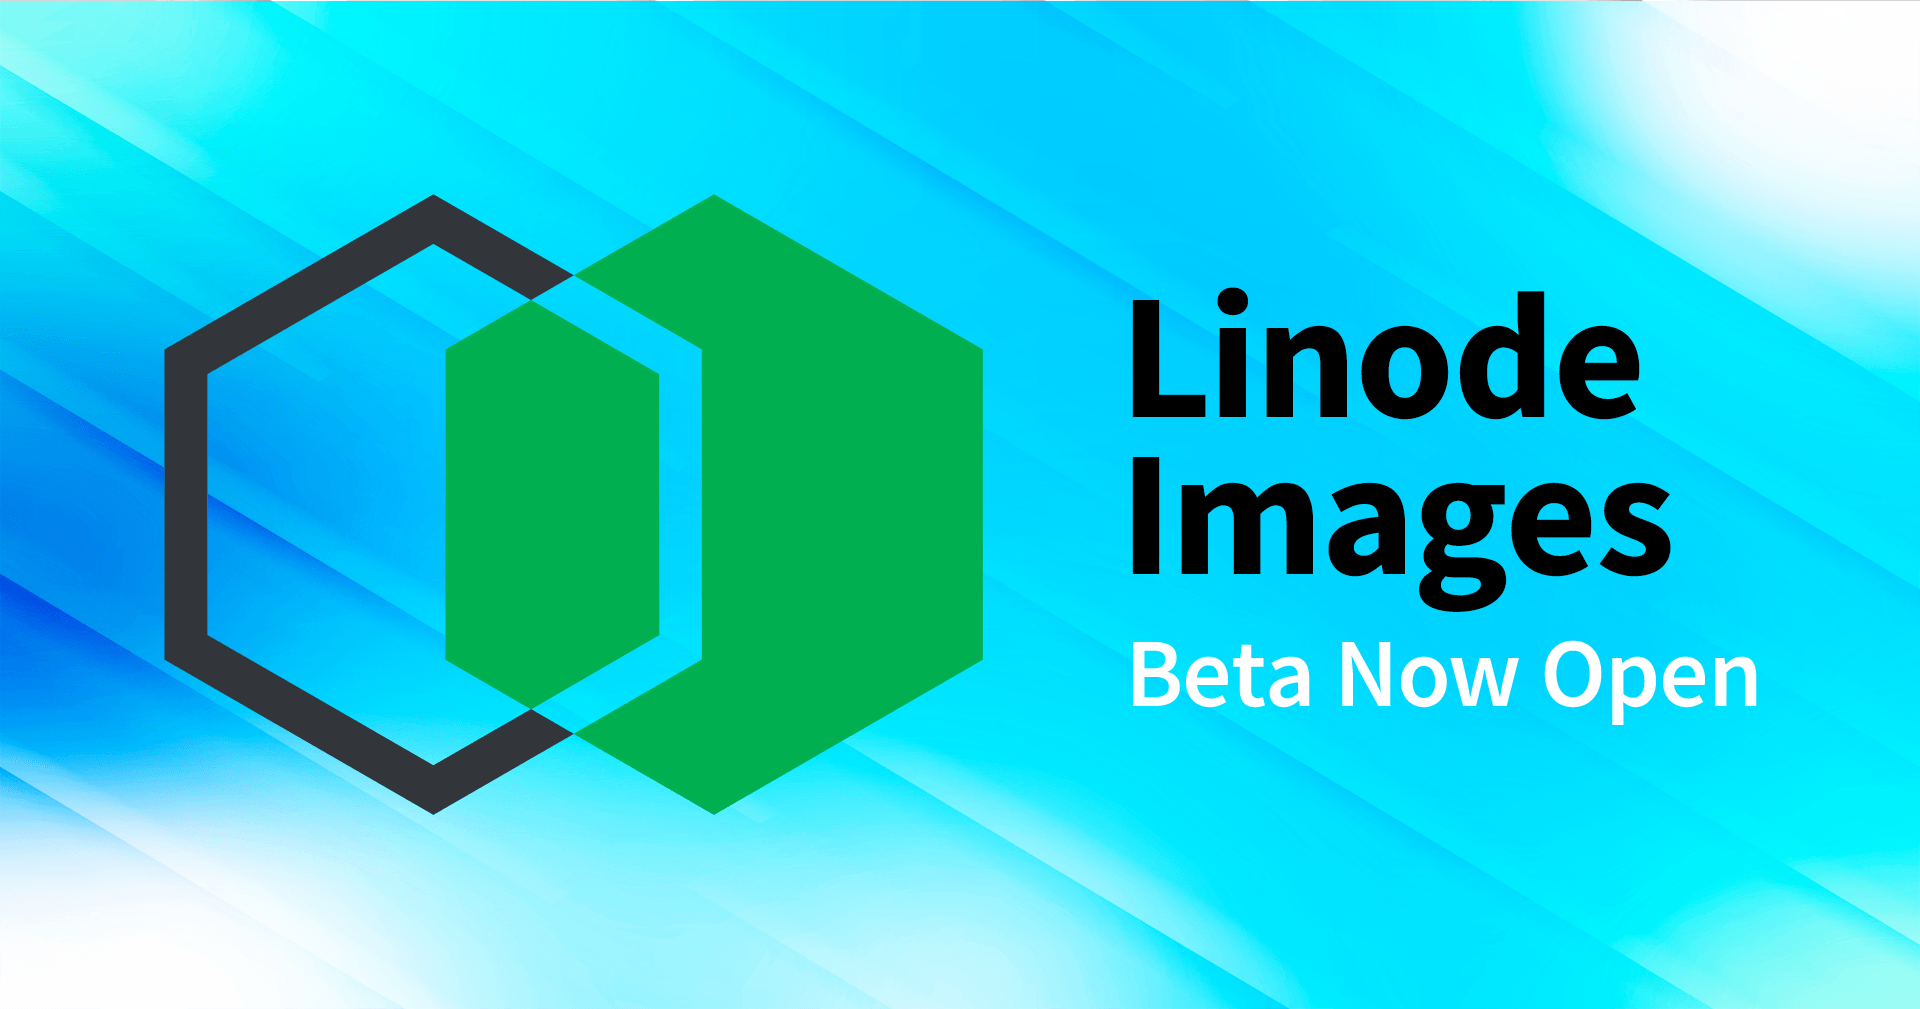 Linode_Images_Beta_Now_Open.png